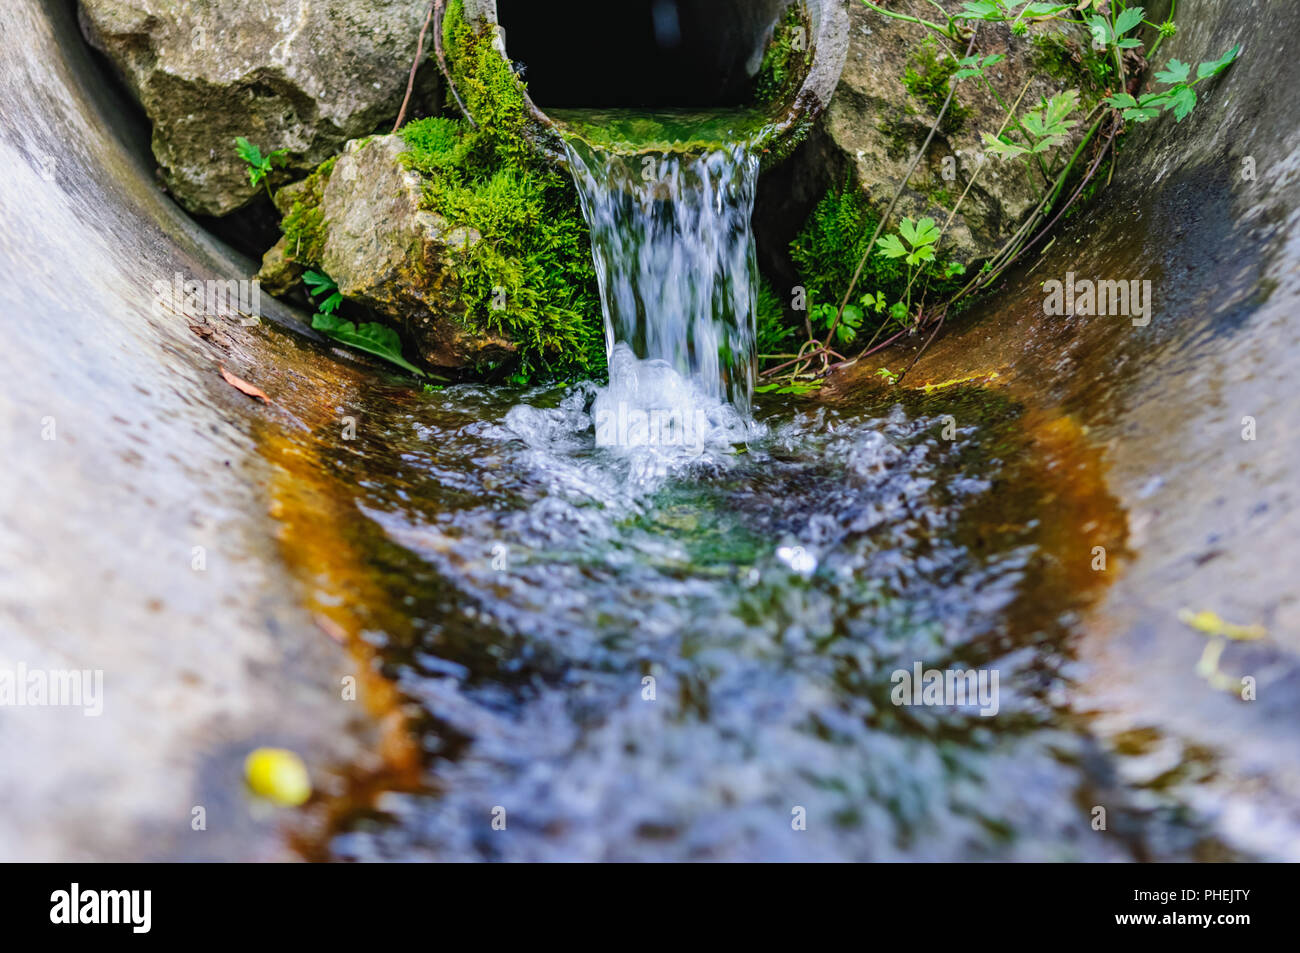 flowing water spring pipe Stock Photo